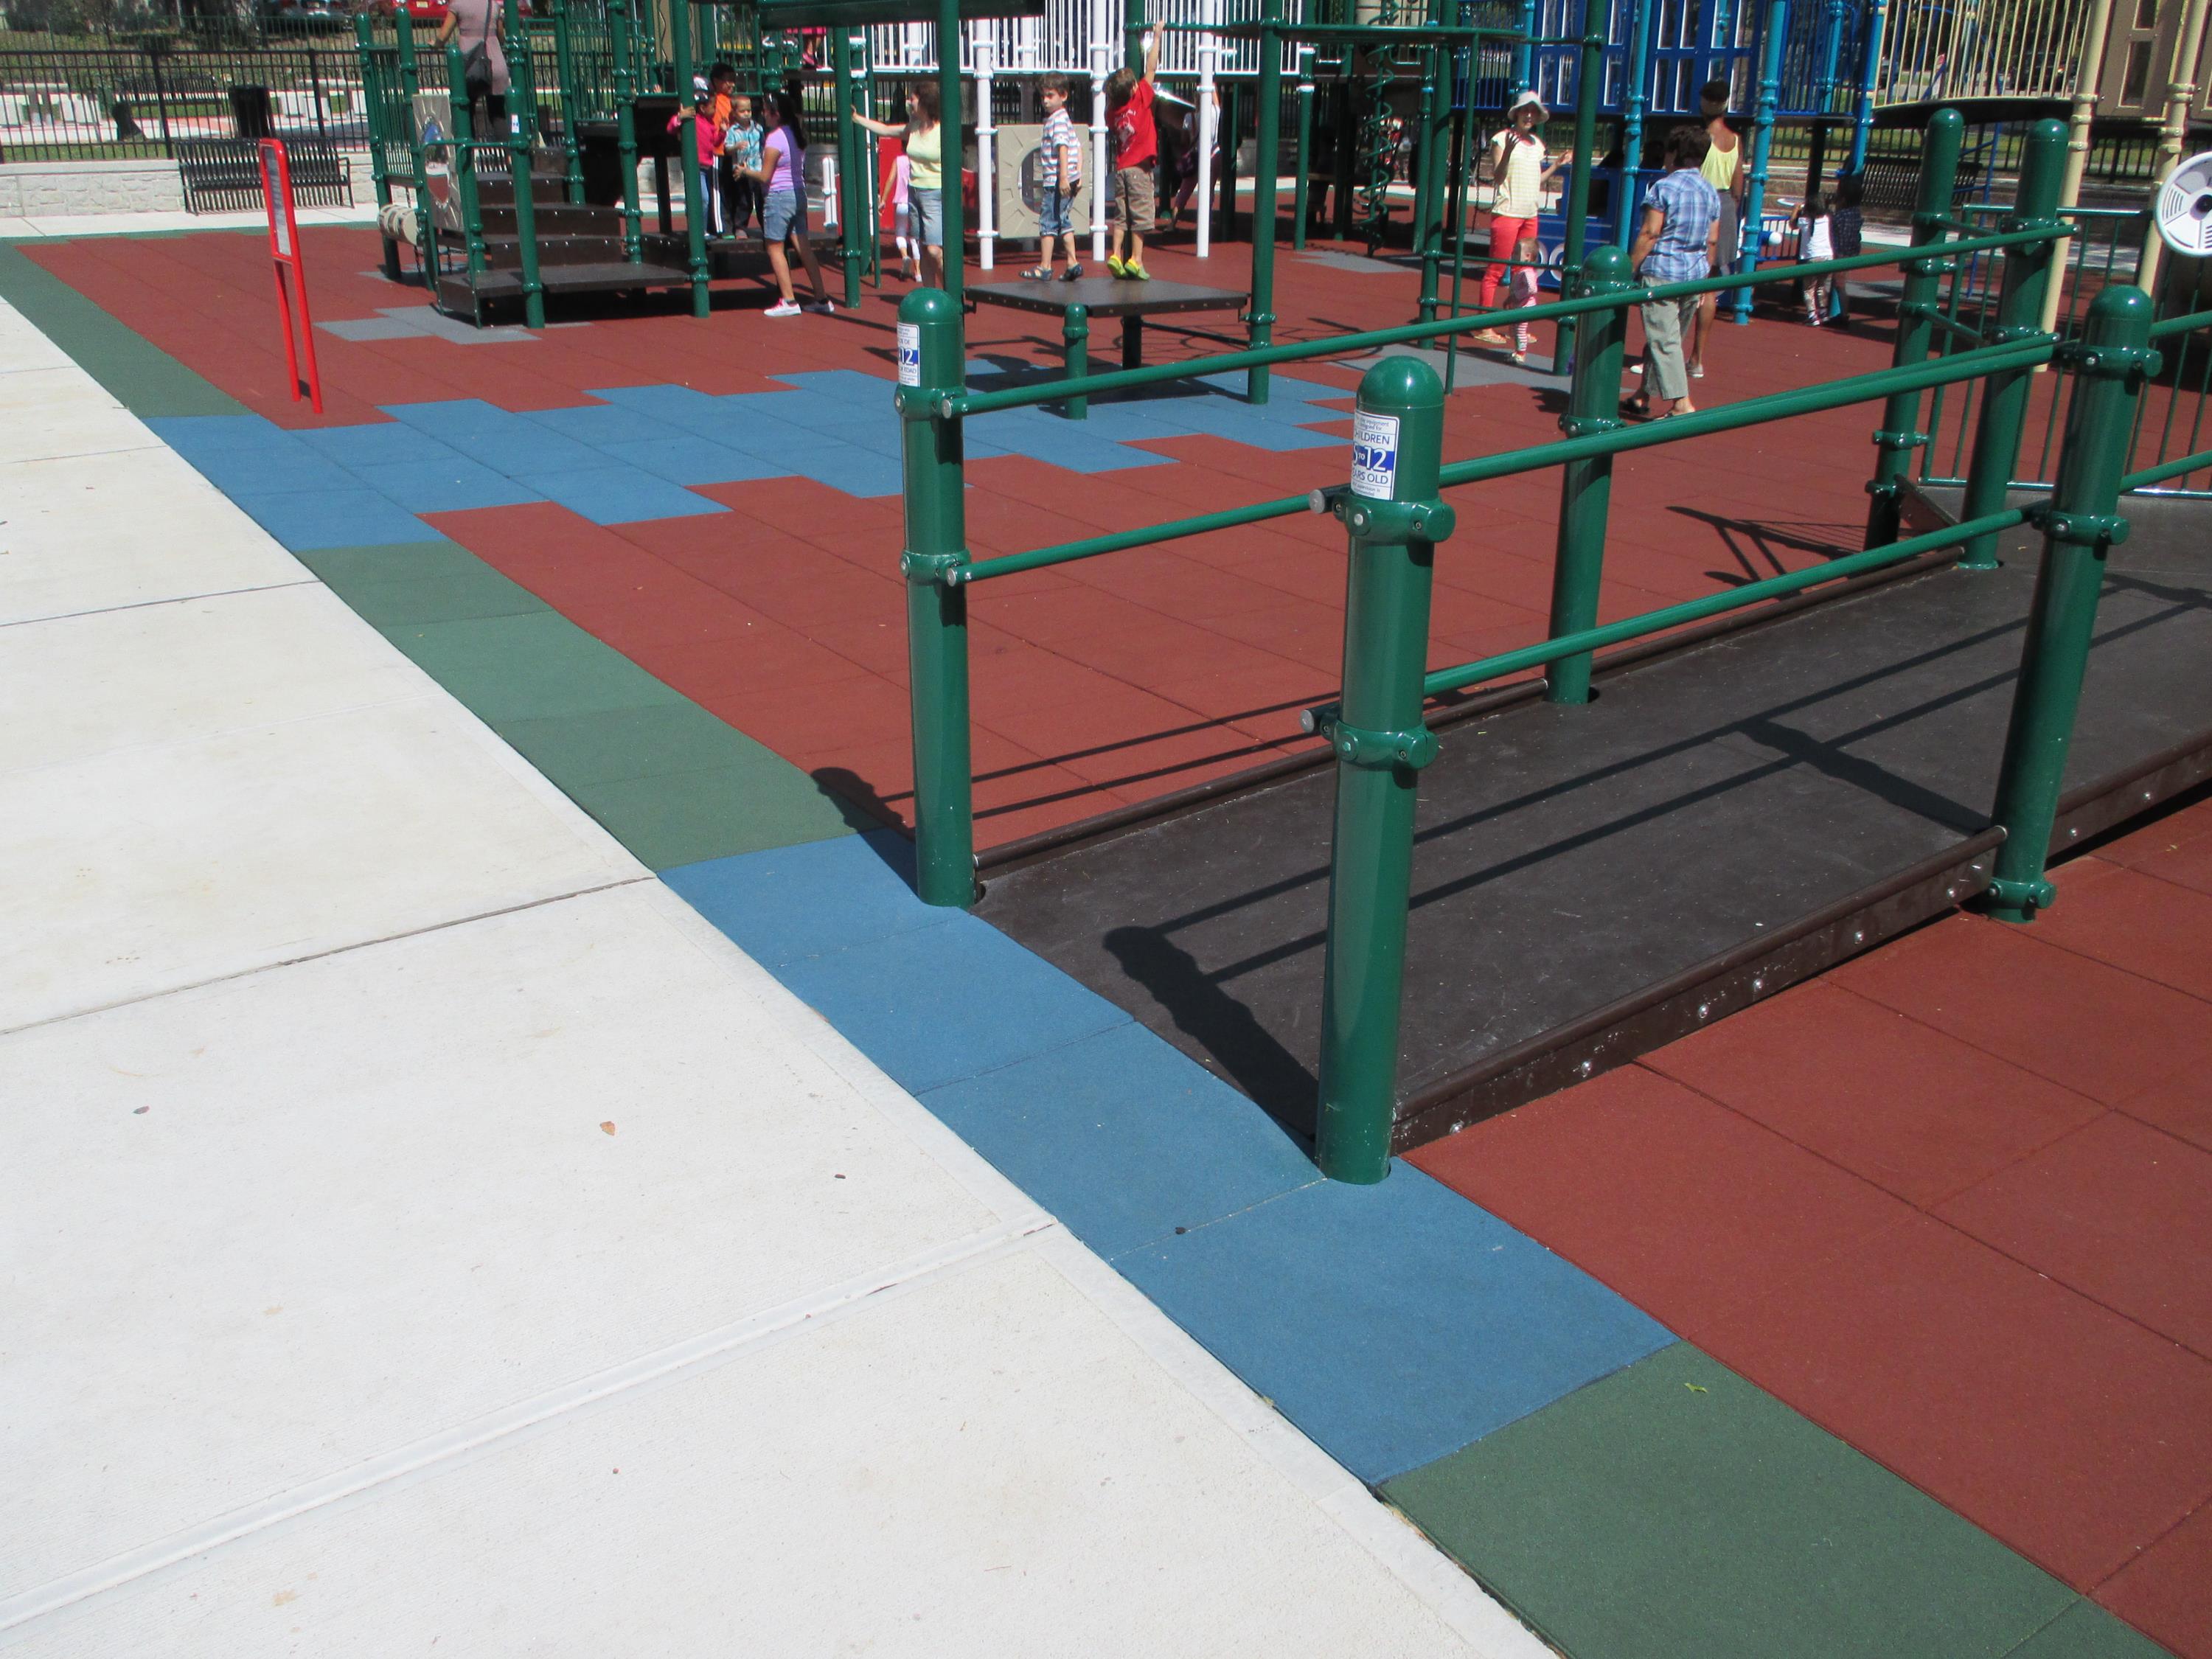 UNITY - Showing ADA access ramp and exist area for this park playground